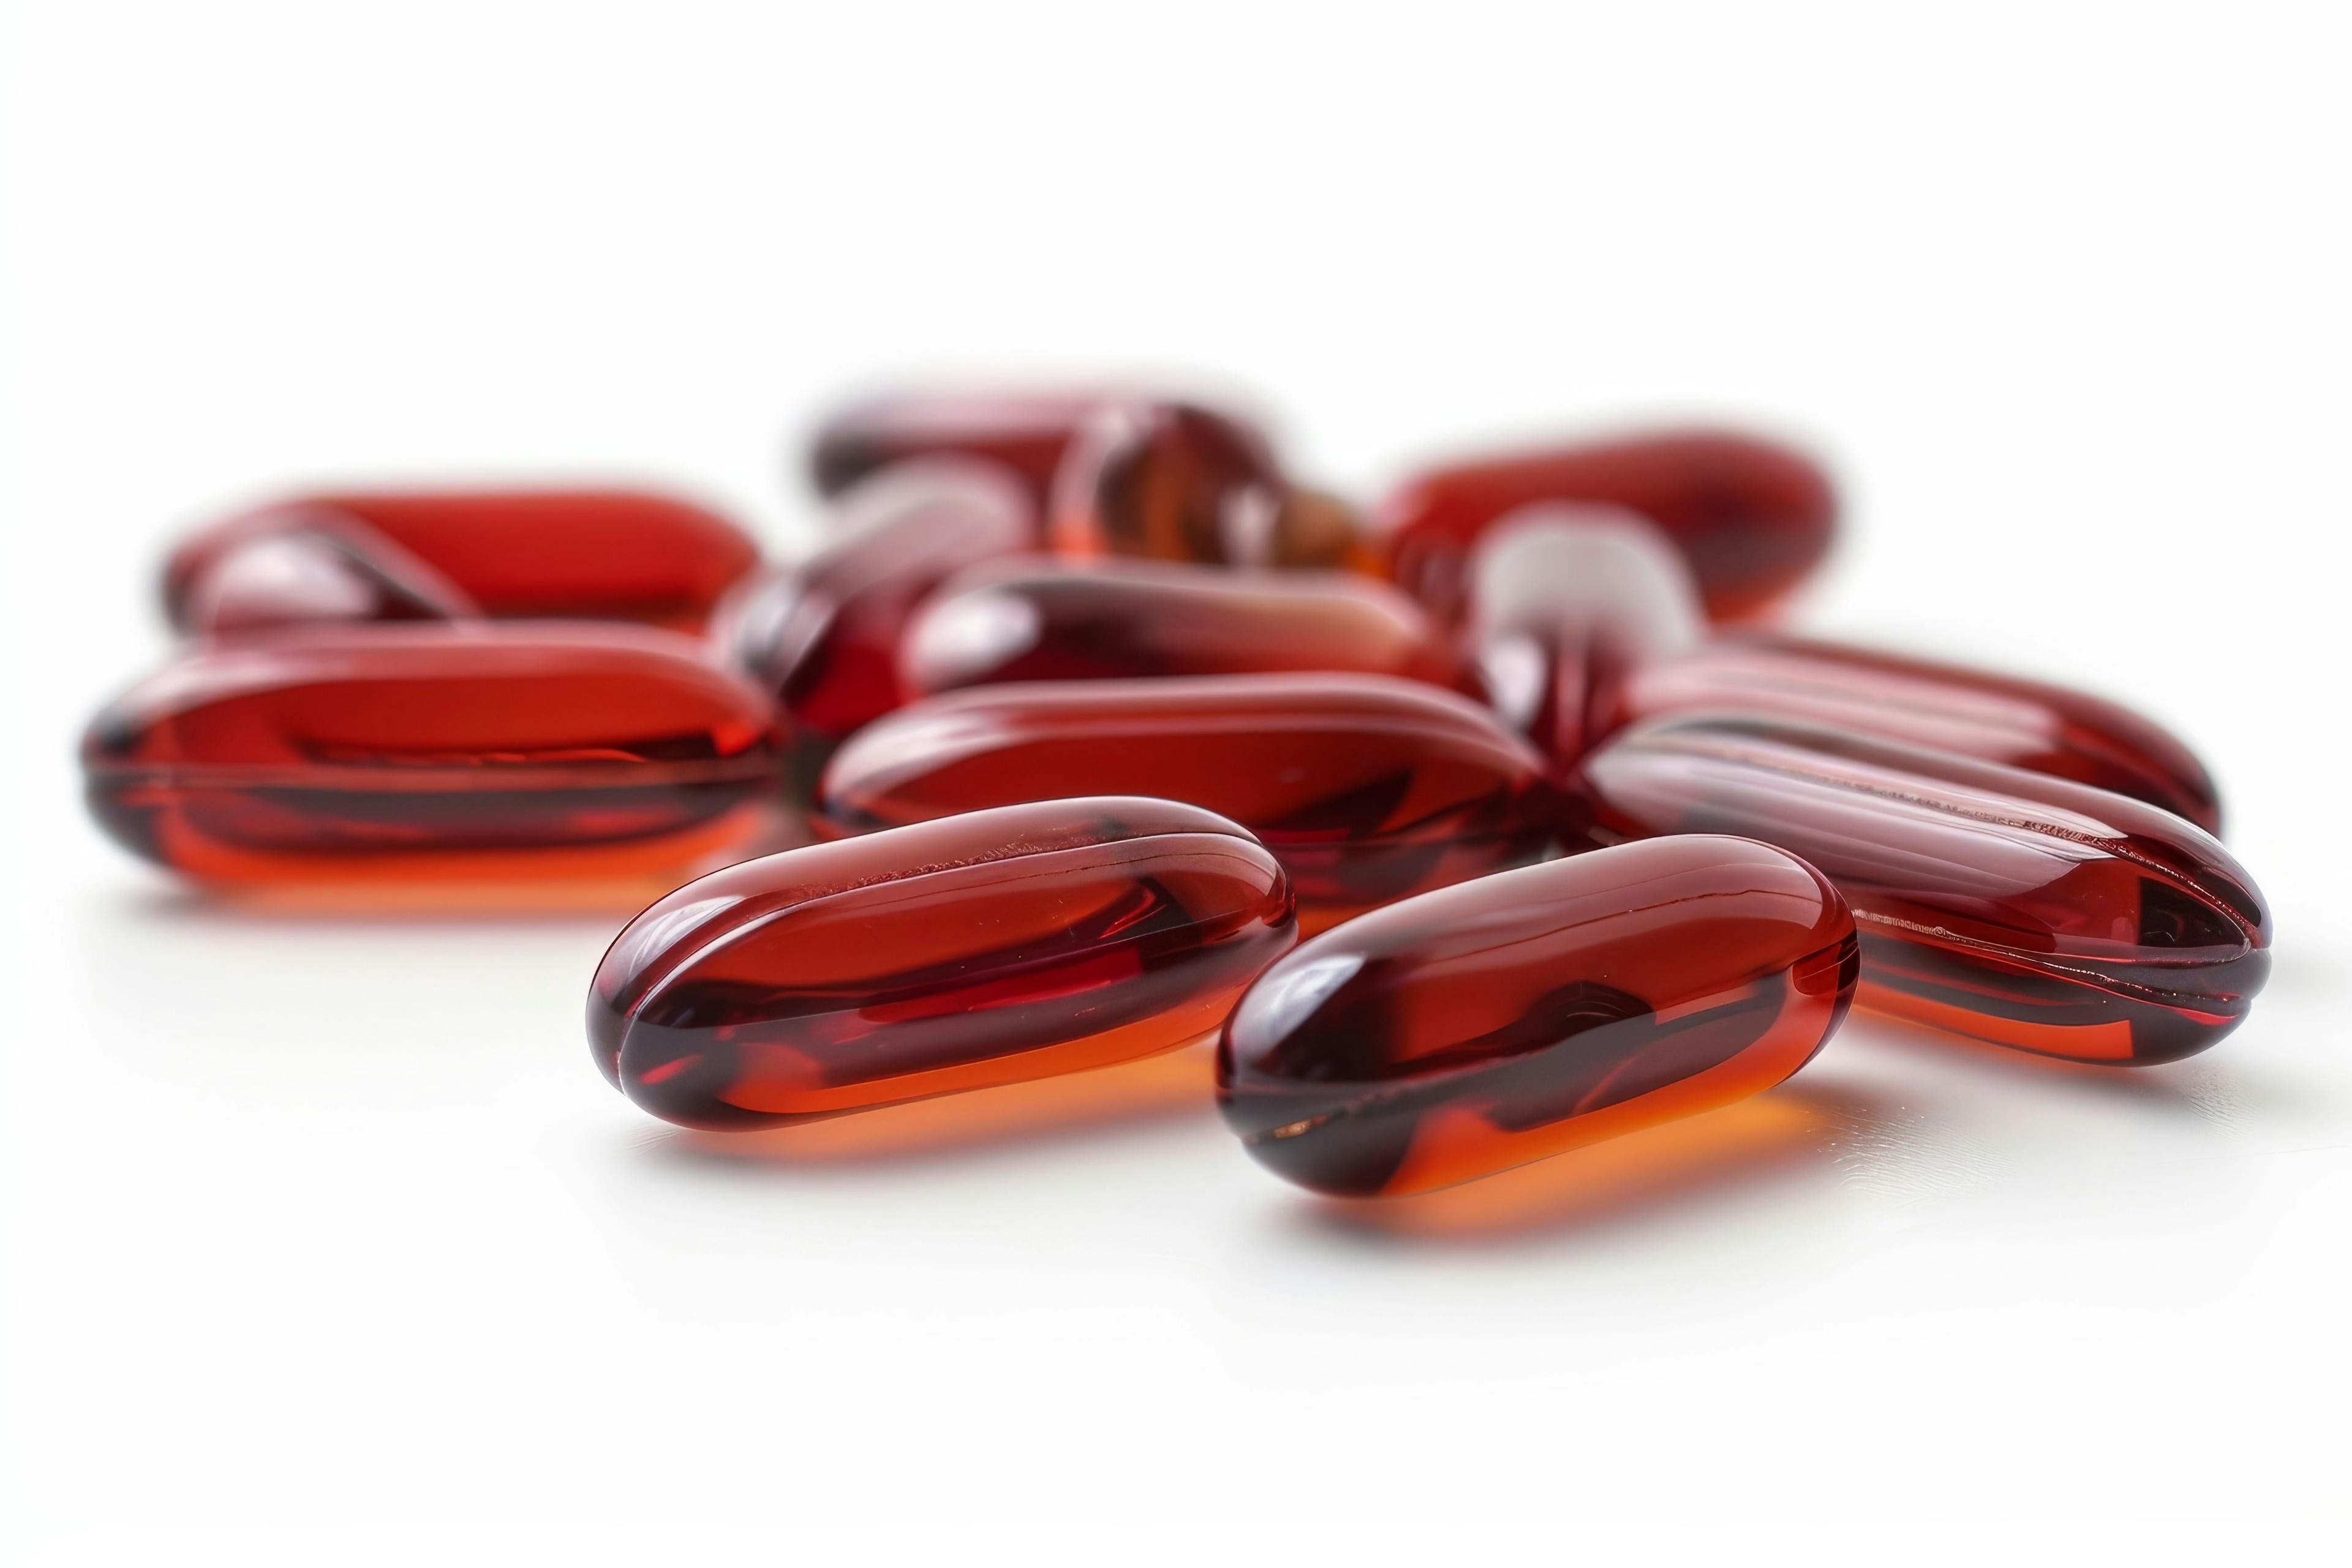 Using Krill Oil as a Natural Treatment for Osteoarthritis Pain